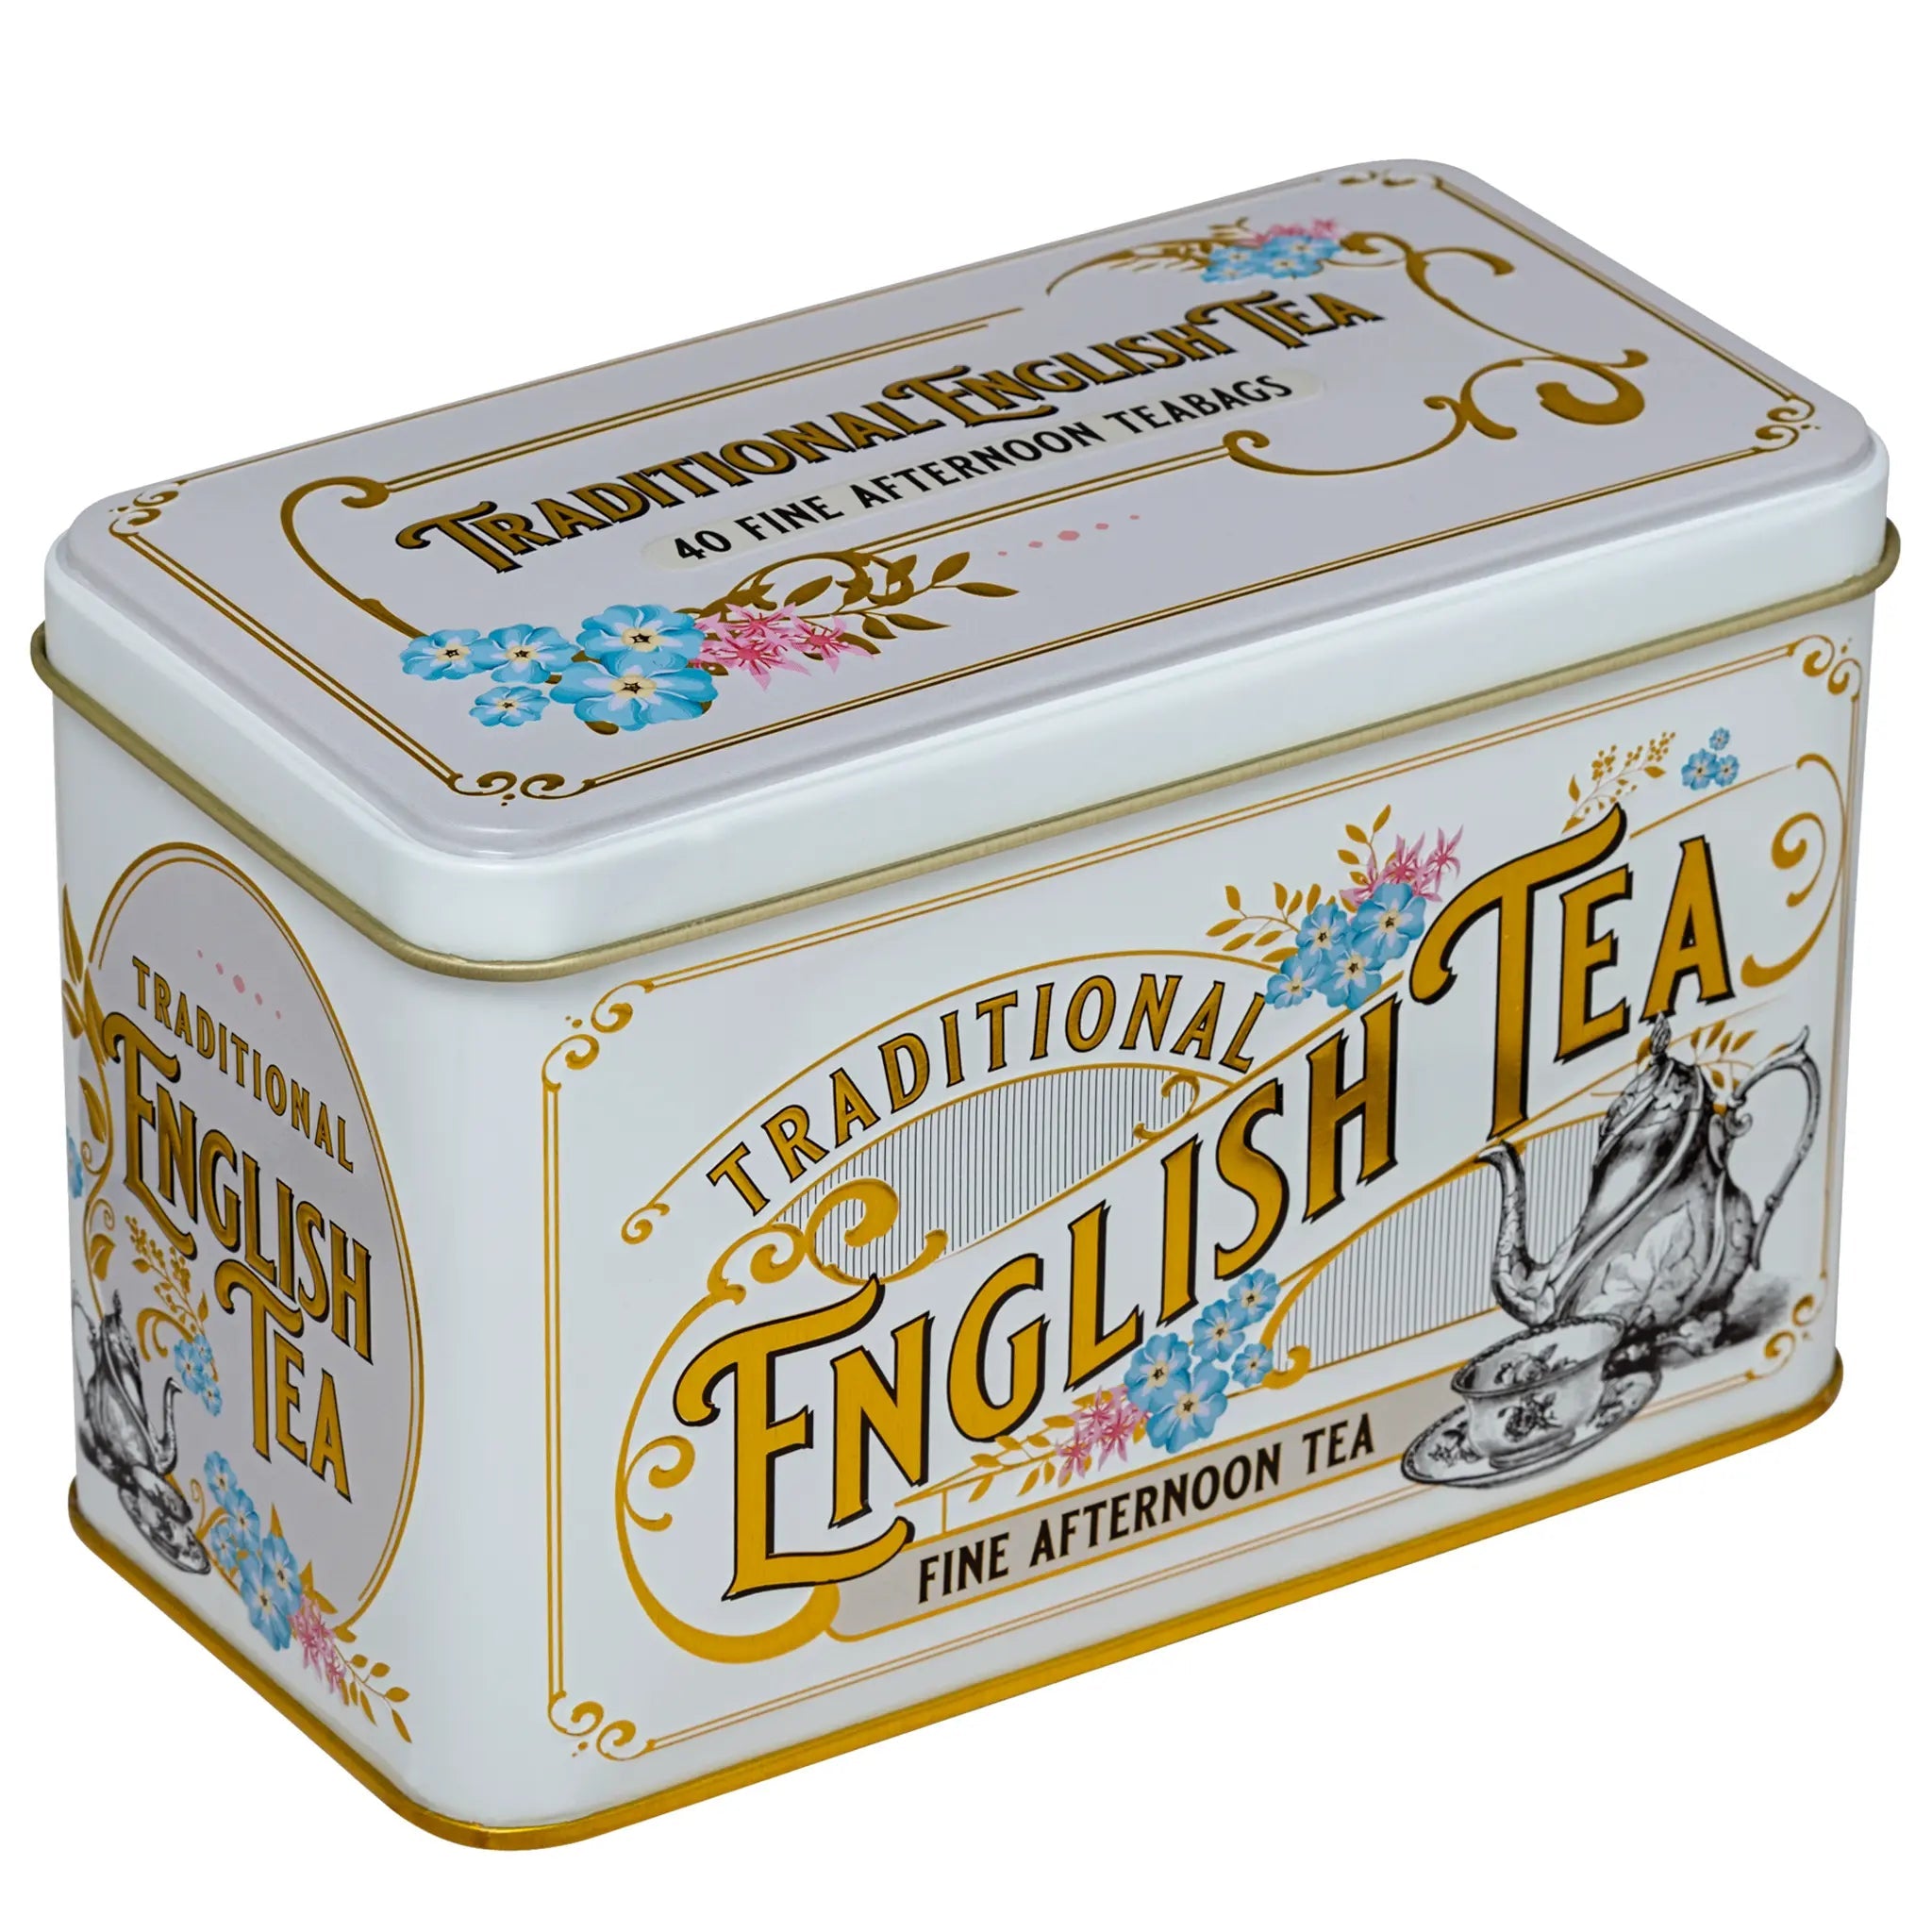 Vintage Victorian Classic Tea Tin in Ivory with 40 Teabags Tea Tins New English Teas 